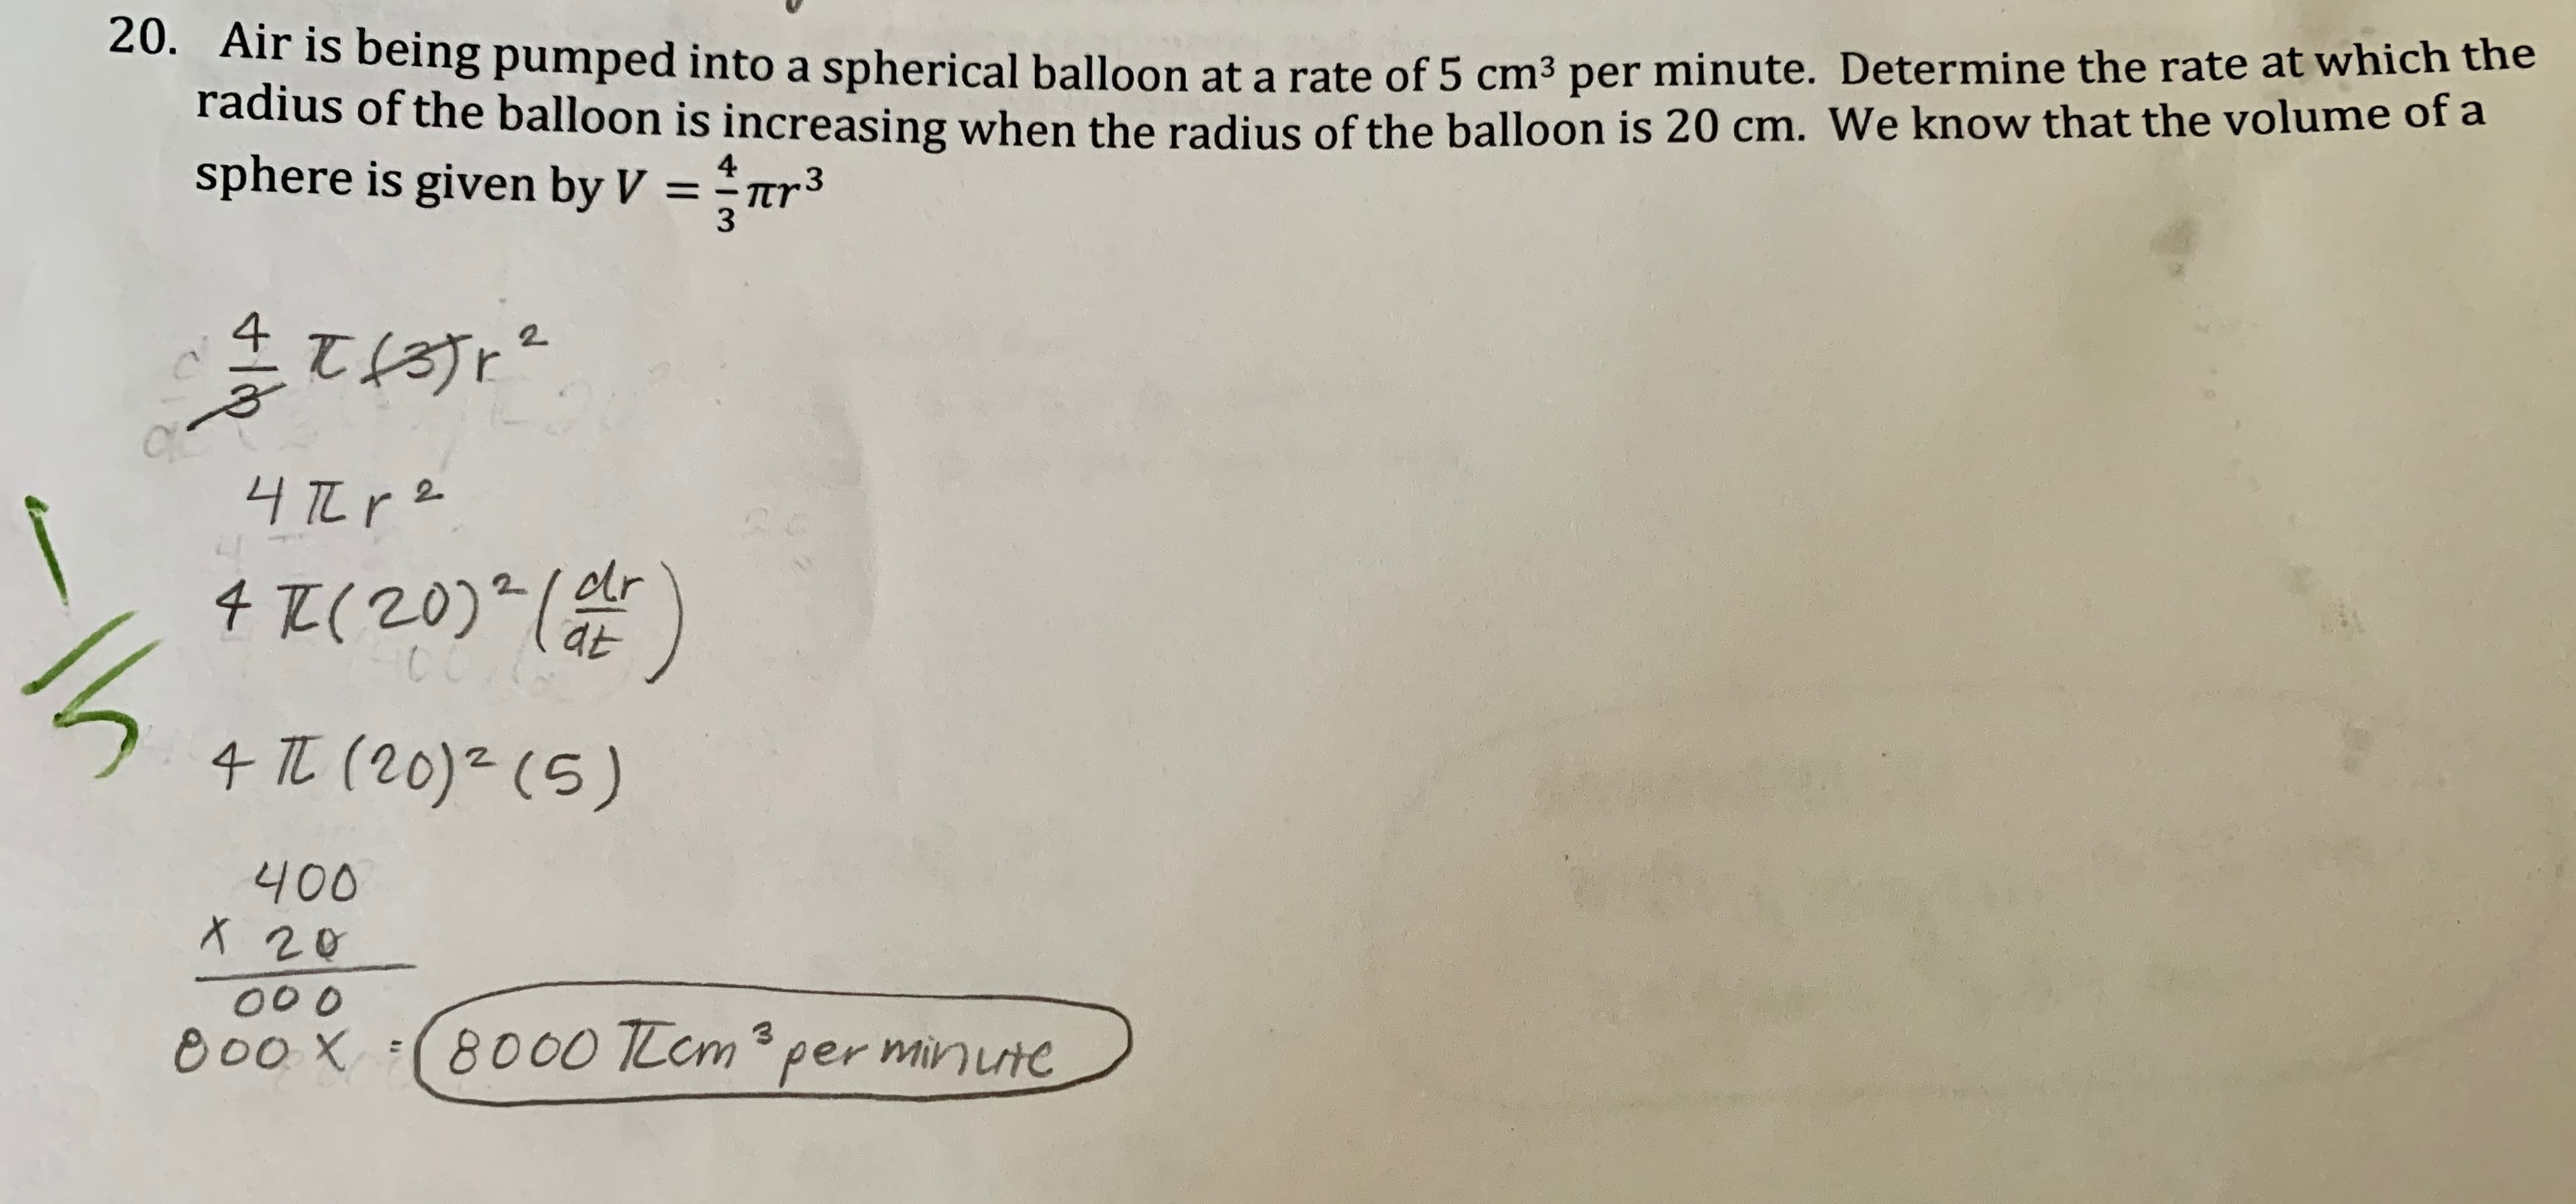 20. Air is being pumped into a spherical balloon at a rate of 5 cm3 per minute. Determine the rate at which the
radius of the balloon is increasing when the radius of the balloon is 20 cm. We know that the volume of a
sphere is given by V
4
.3
Tr
3
1
2
4 (20)(r
CC
4 (20) (5)
400
X 20
00 0
8000 TLem per minutc
3
e00X
